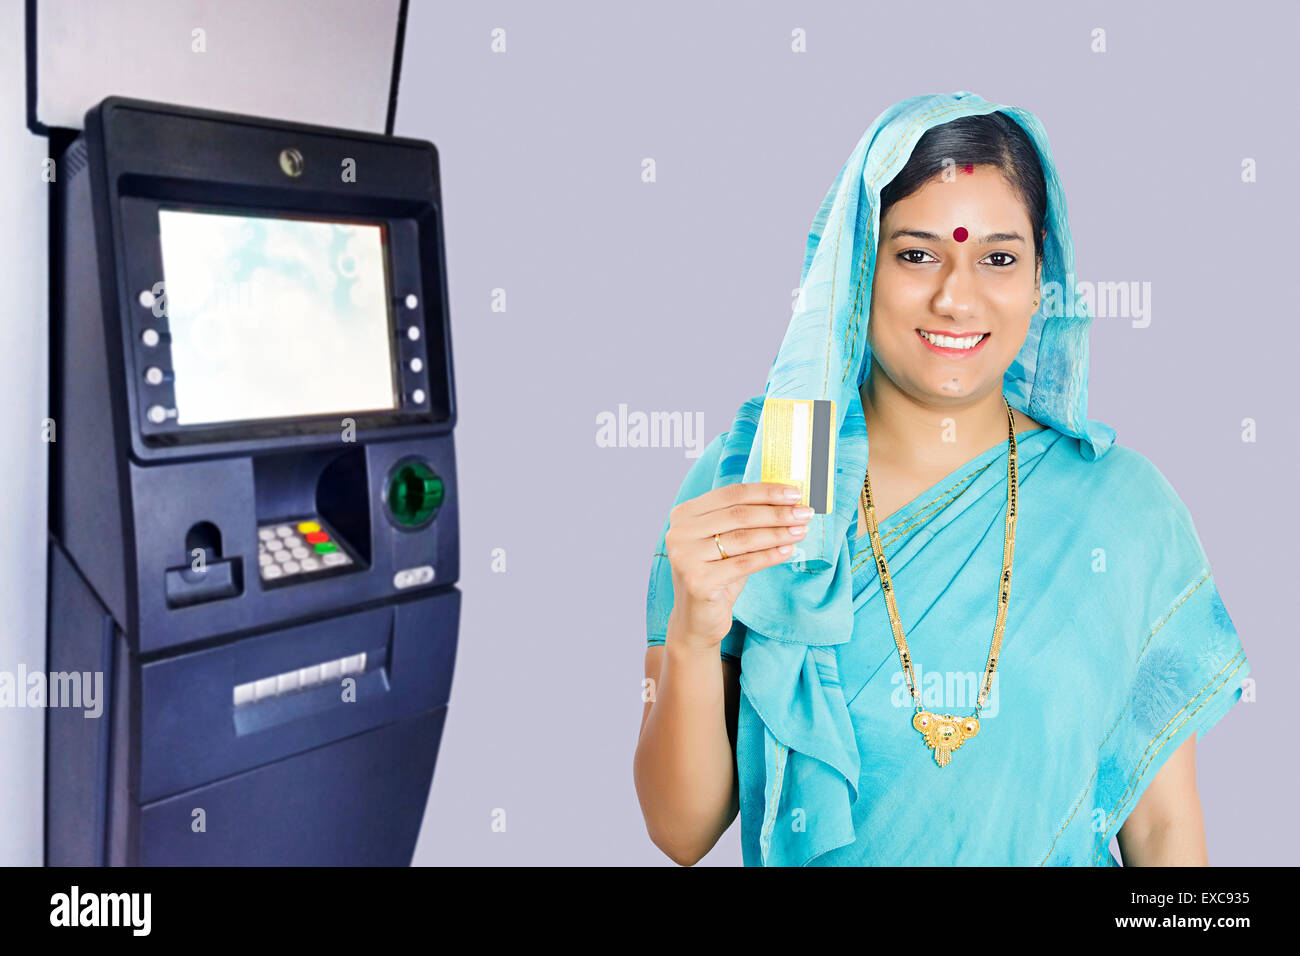 1 indian Rural woman Credit Card showing Stock Photo